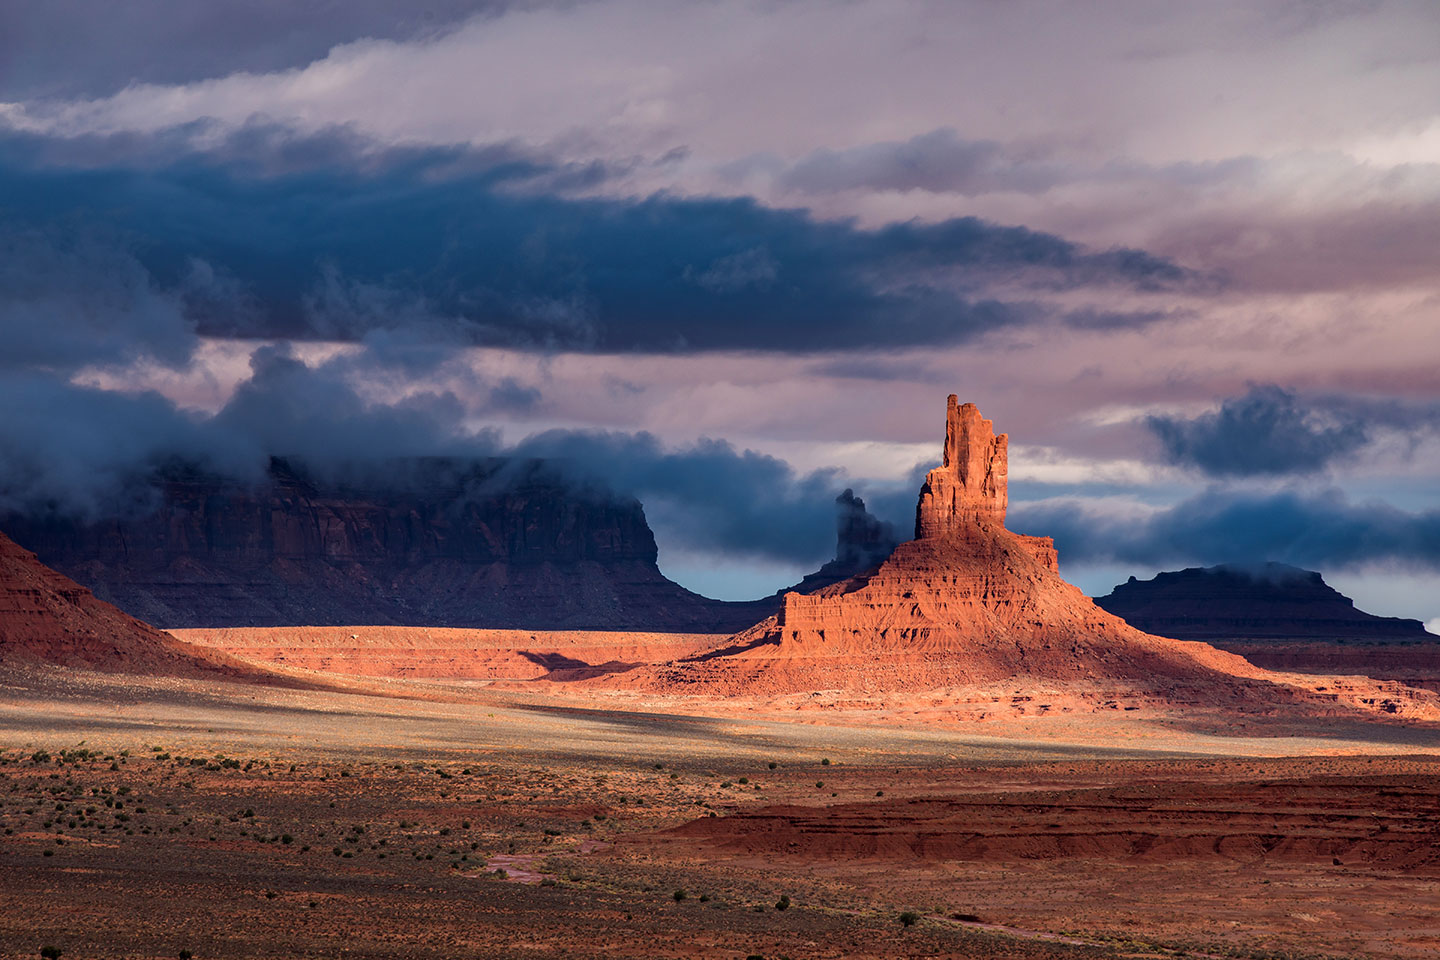 Elephant butte in Monument Valley, Arizona